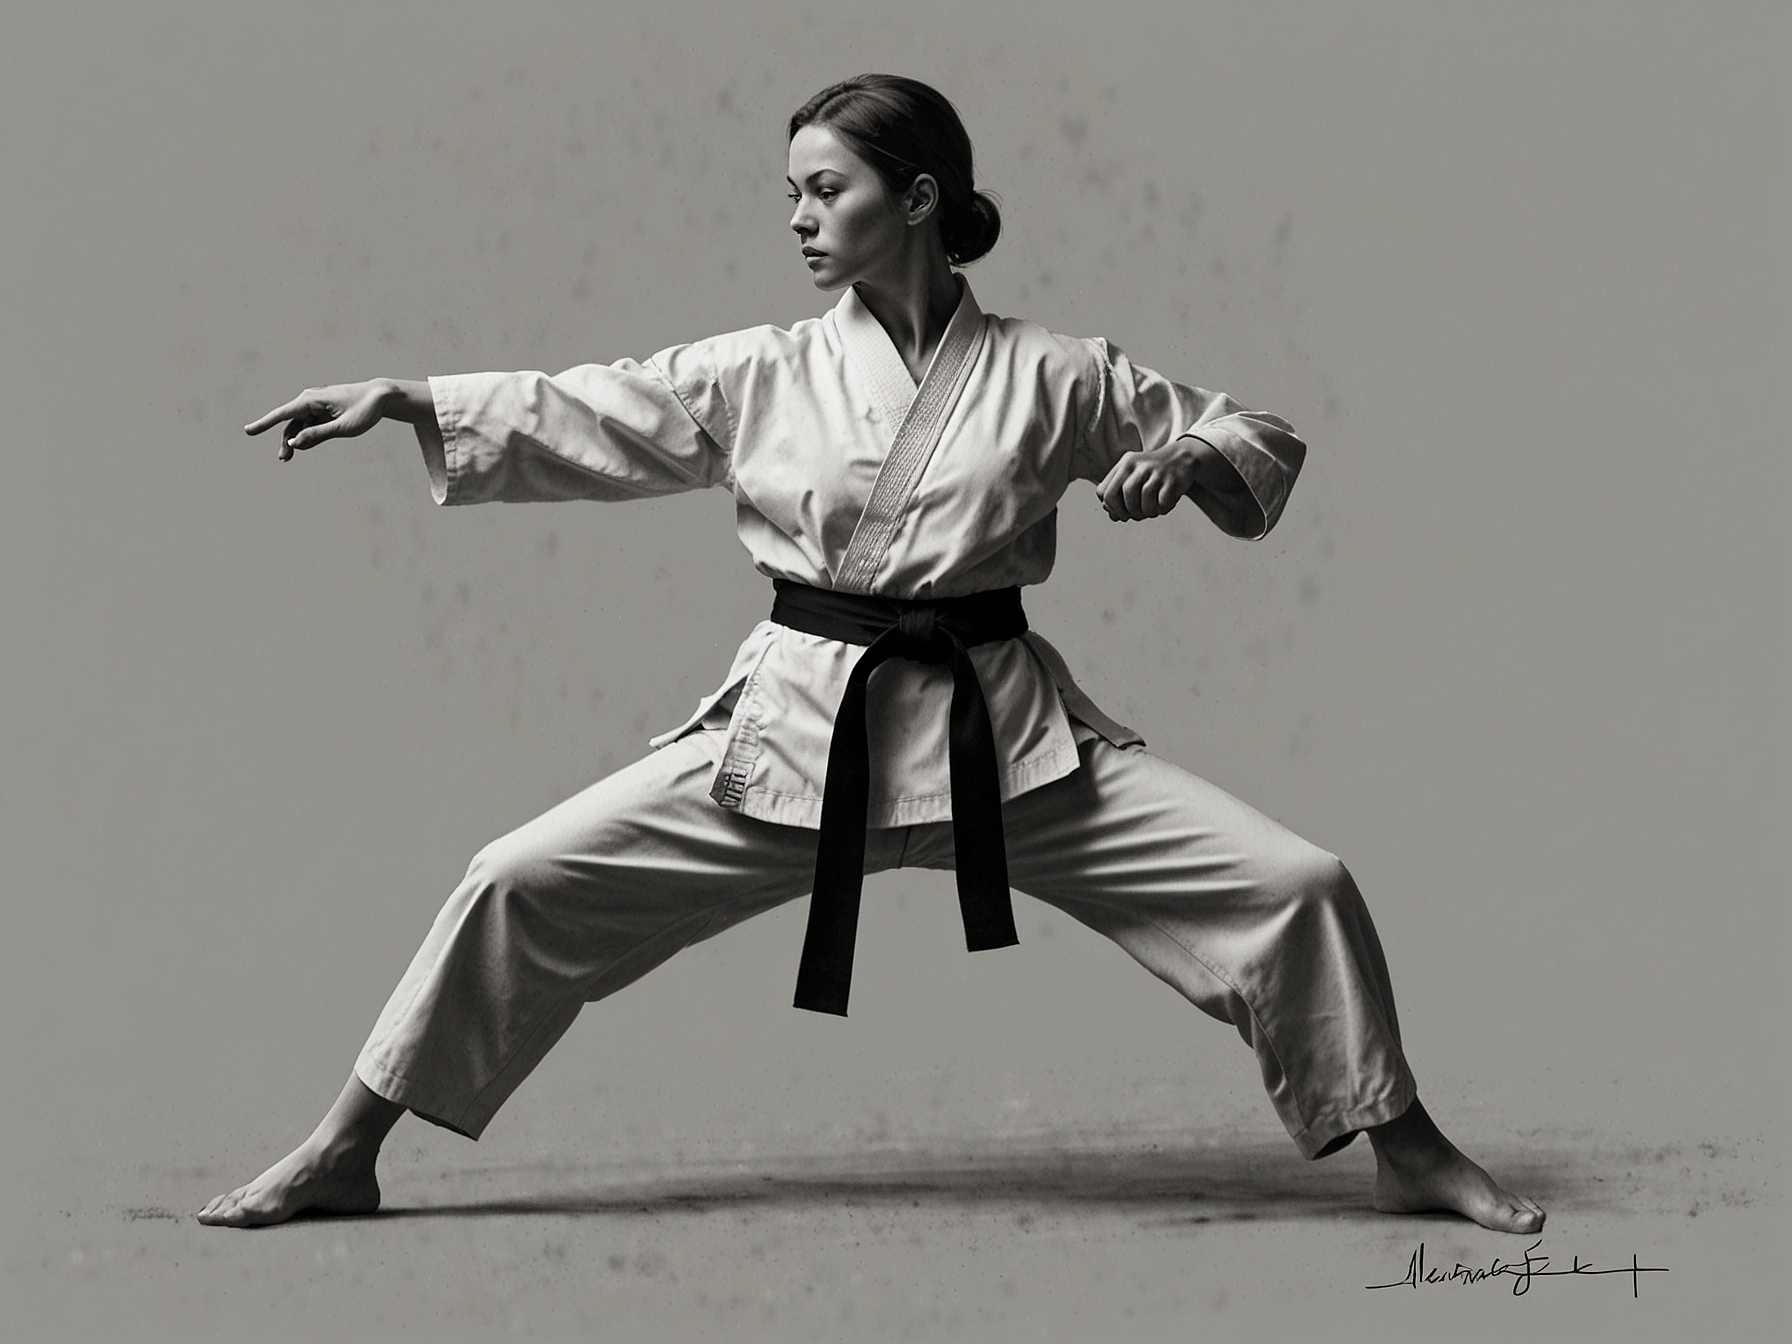 Clark practicing martial arts, showcasing a karate move, emphasizing her unconventional preparation techniques to improve balance, coordination, and ability to absorb contact.